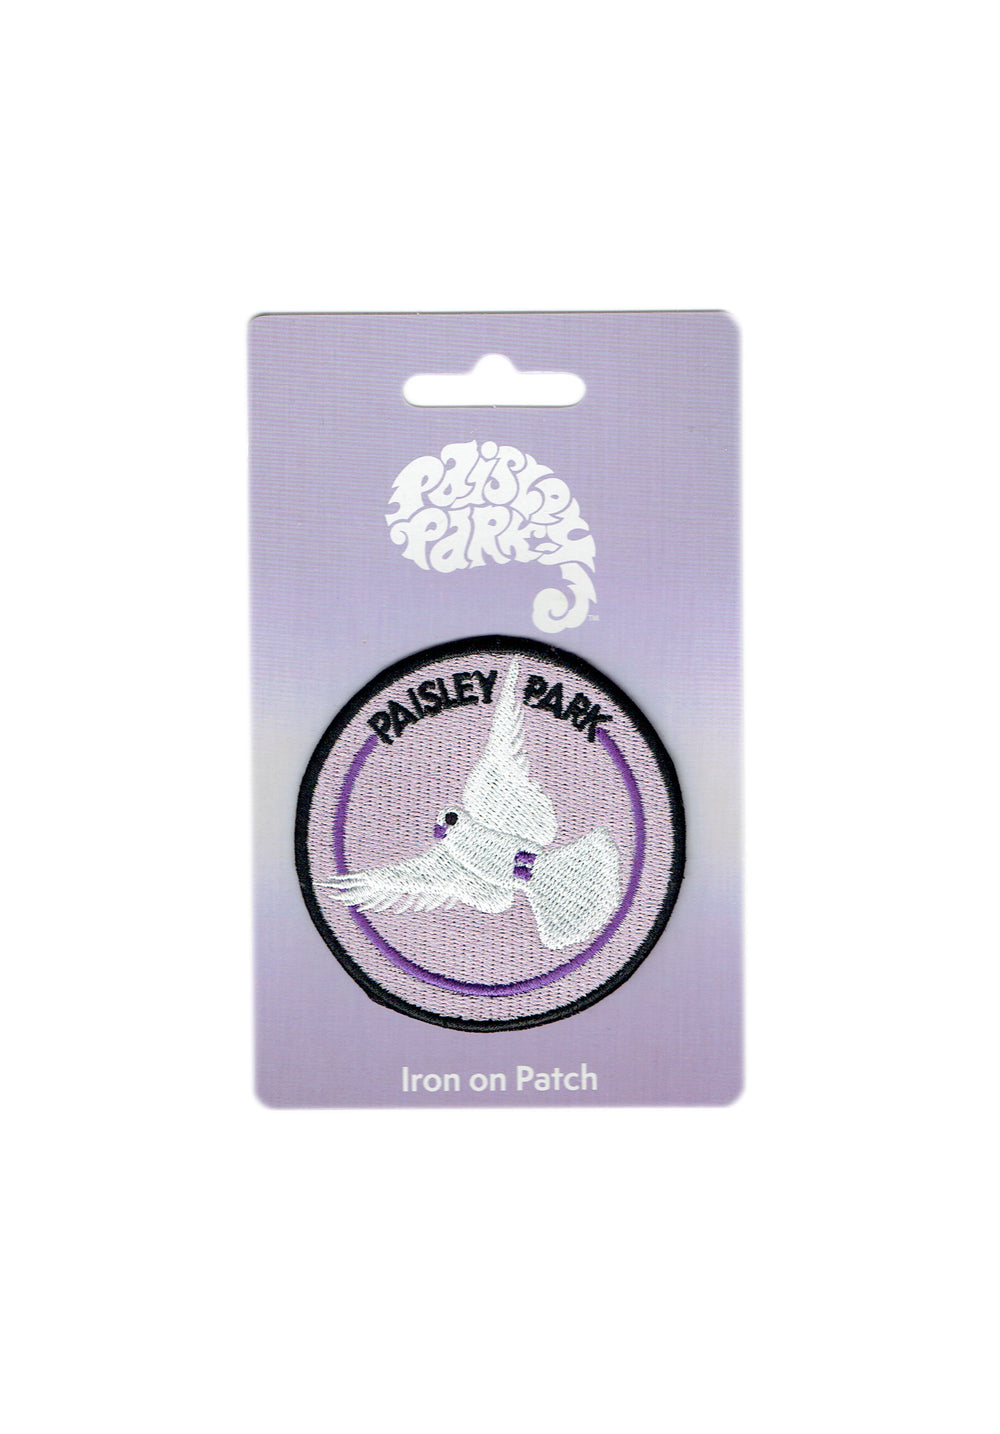 Prince Official Paisley Park Iron On Patch Brand New Dove Round